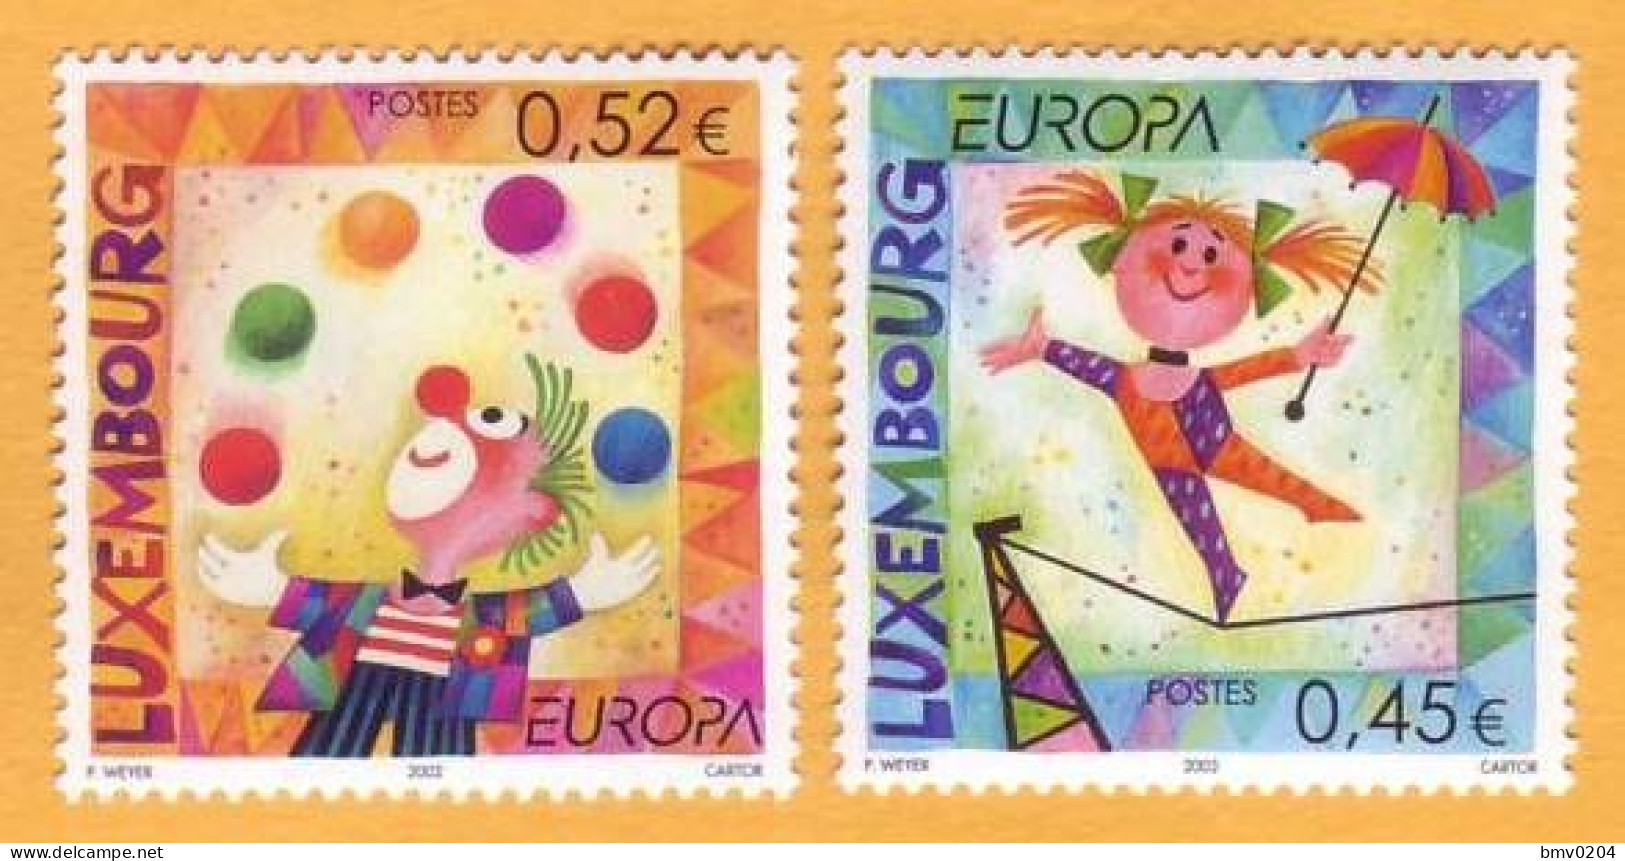 2002, LUXEMBOURG  Europa - Cept  2v Mint - 2002